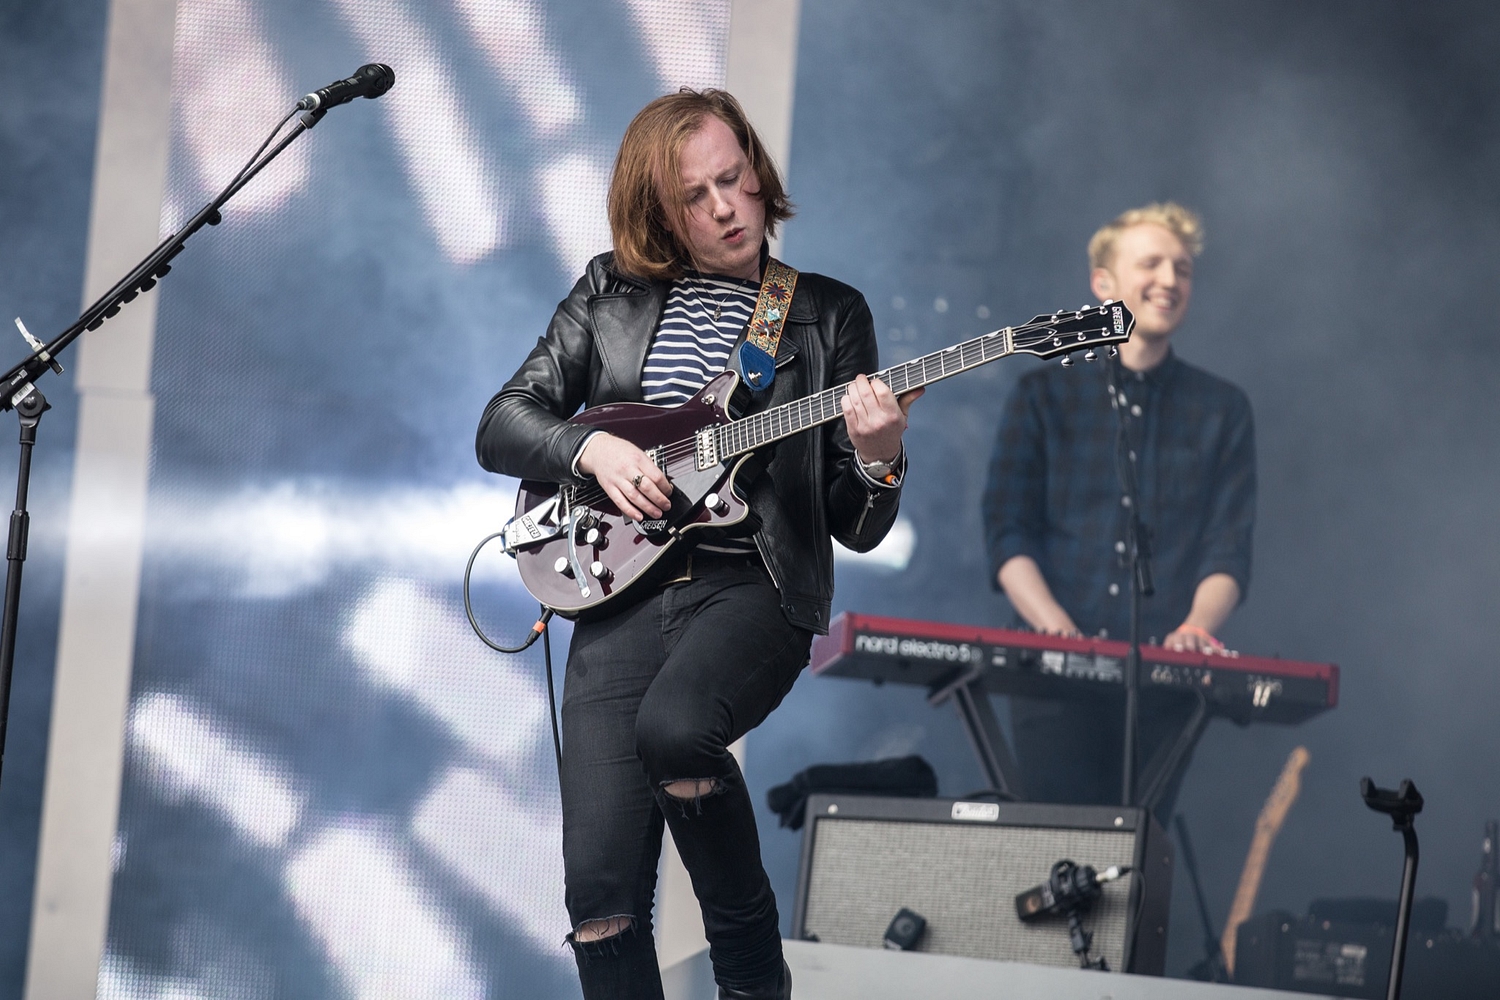 Two Door Cinema Club are playing Tufnell Park Dome!